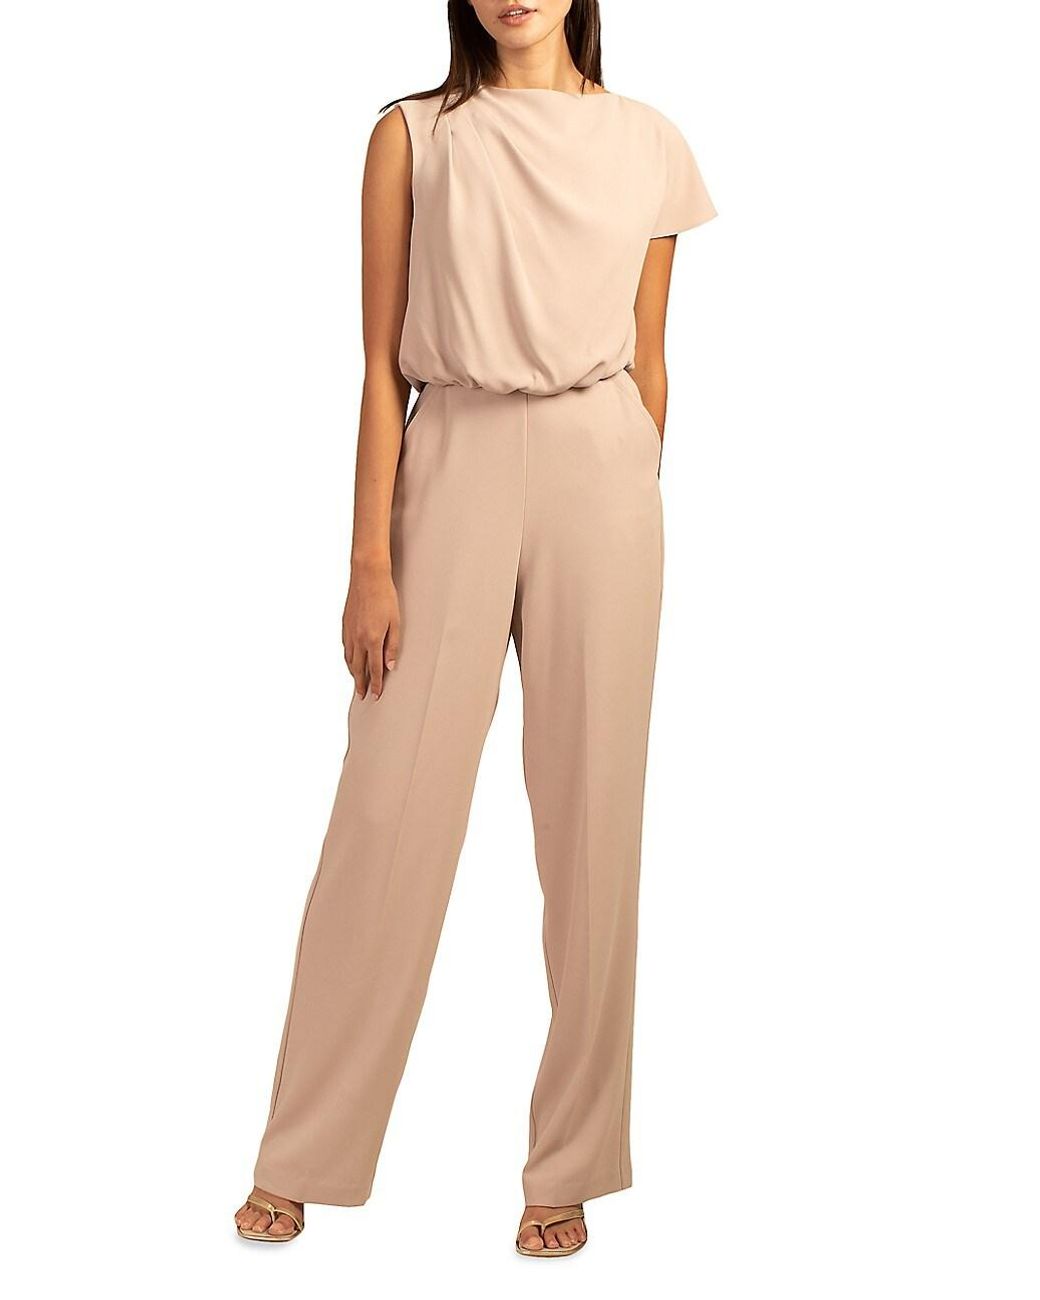 Trina Turk Synthetic Elliana Draped Jumpsuit in Natural | Lyst